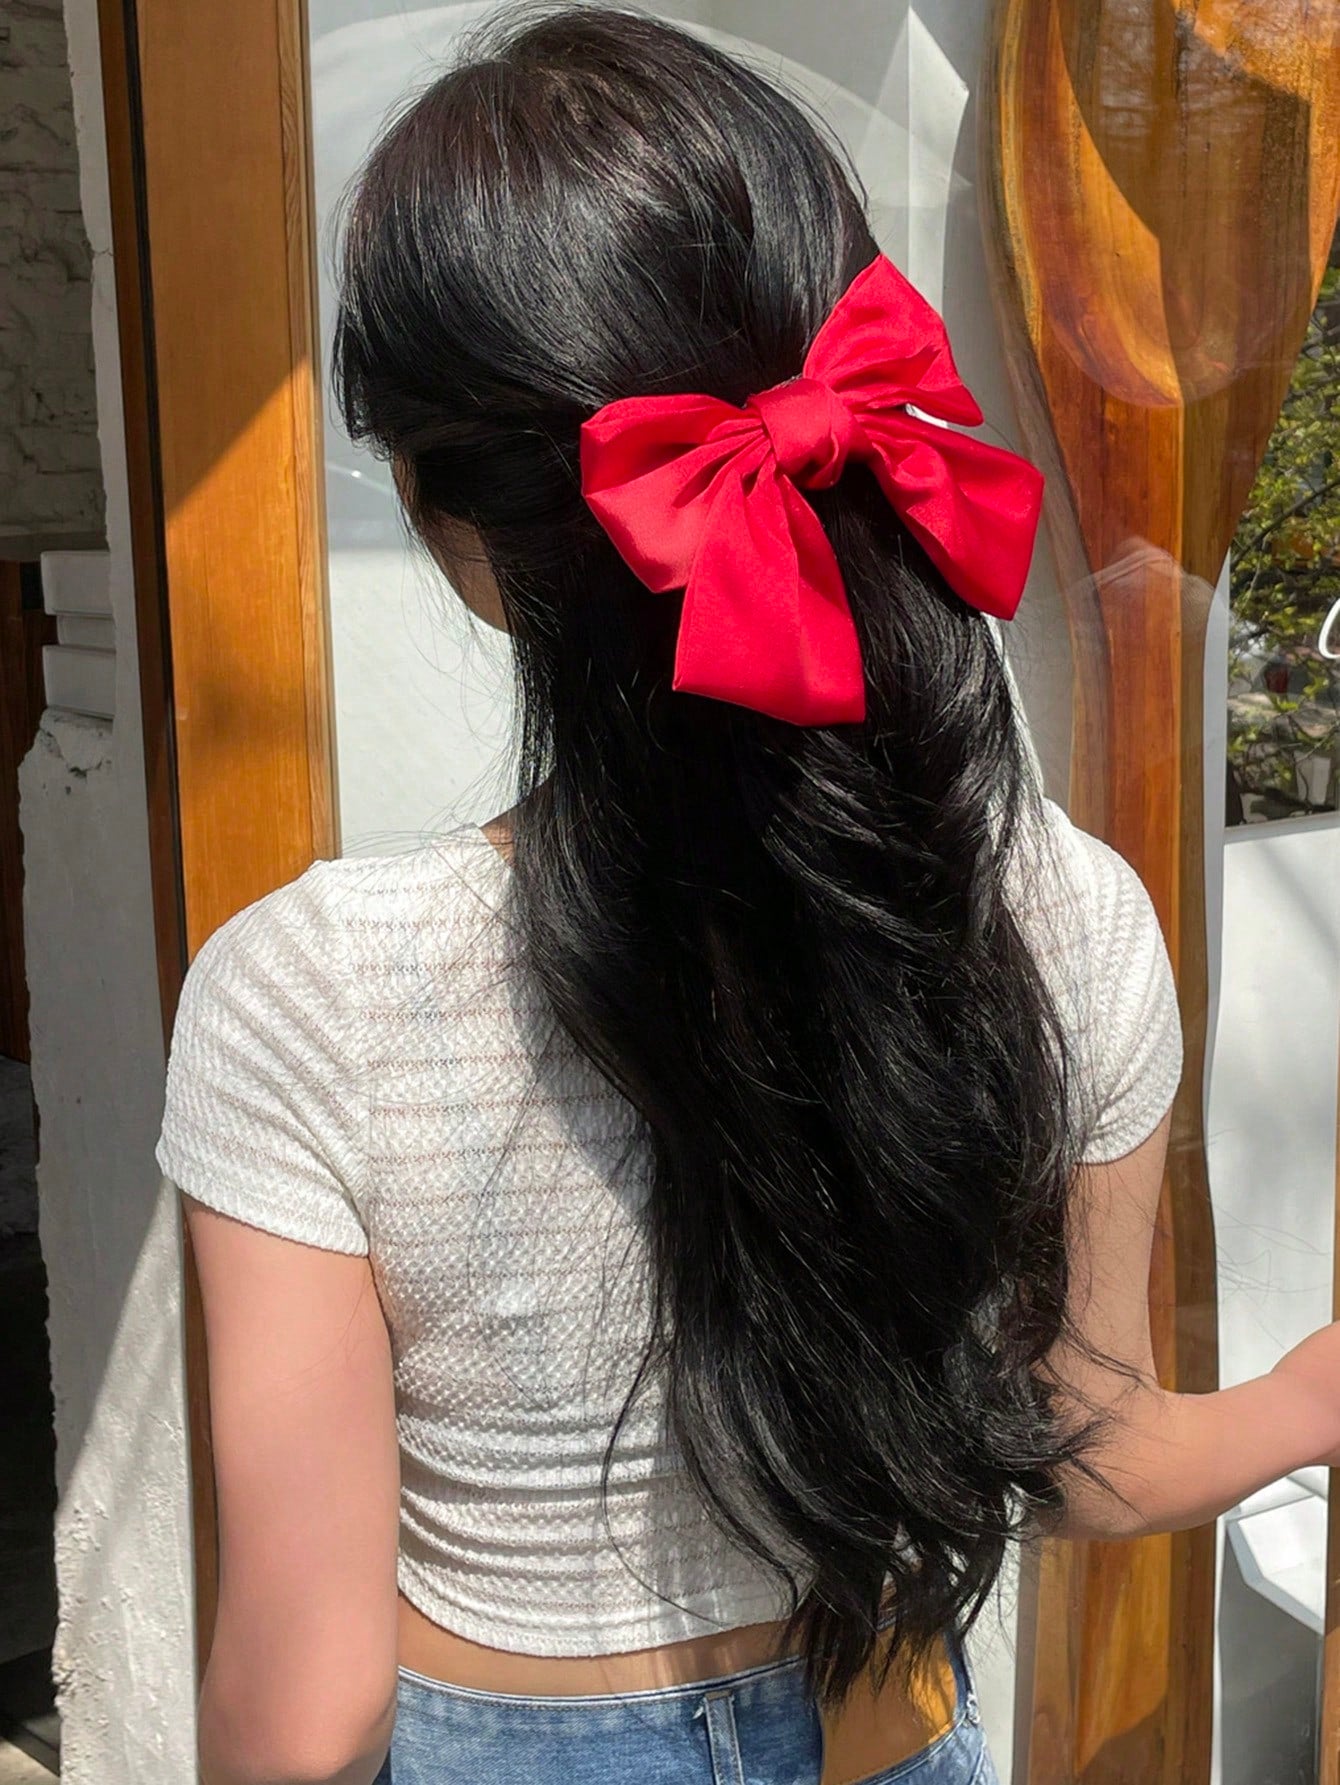 Butterfly Design Fashionable Hair Clip Suitable For Daily Wear